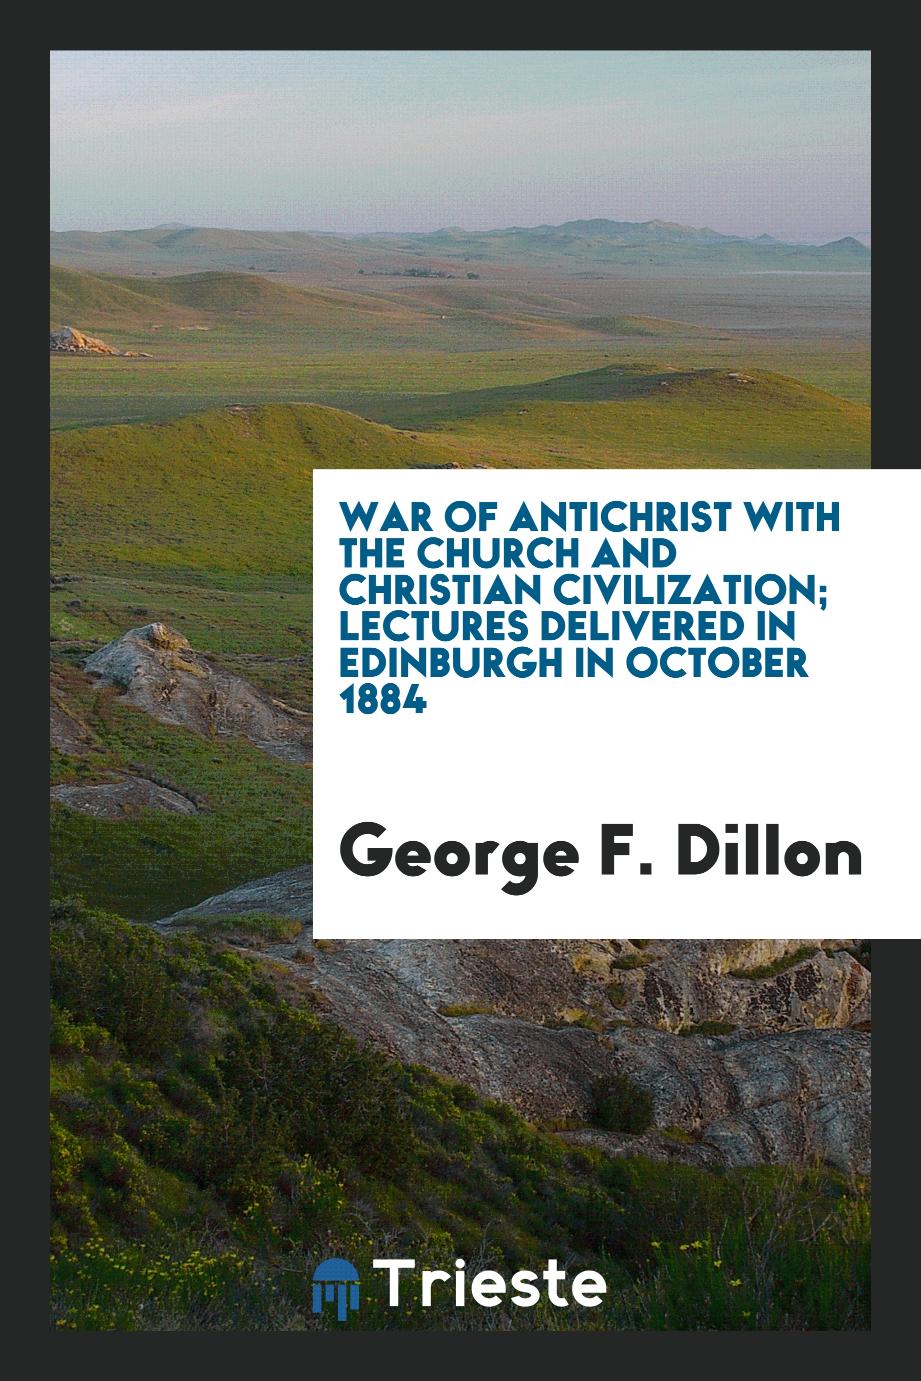 War of antichrist with the Church and Christian civilization; lectures delivered in Edinburgh in October 1884